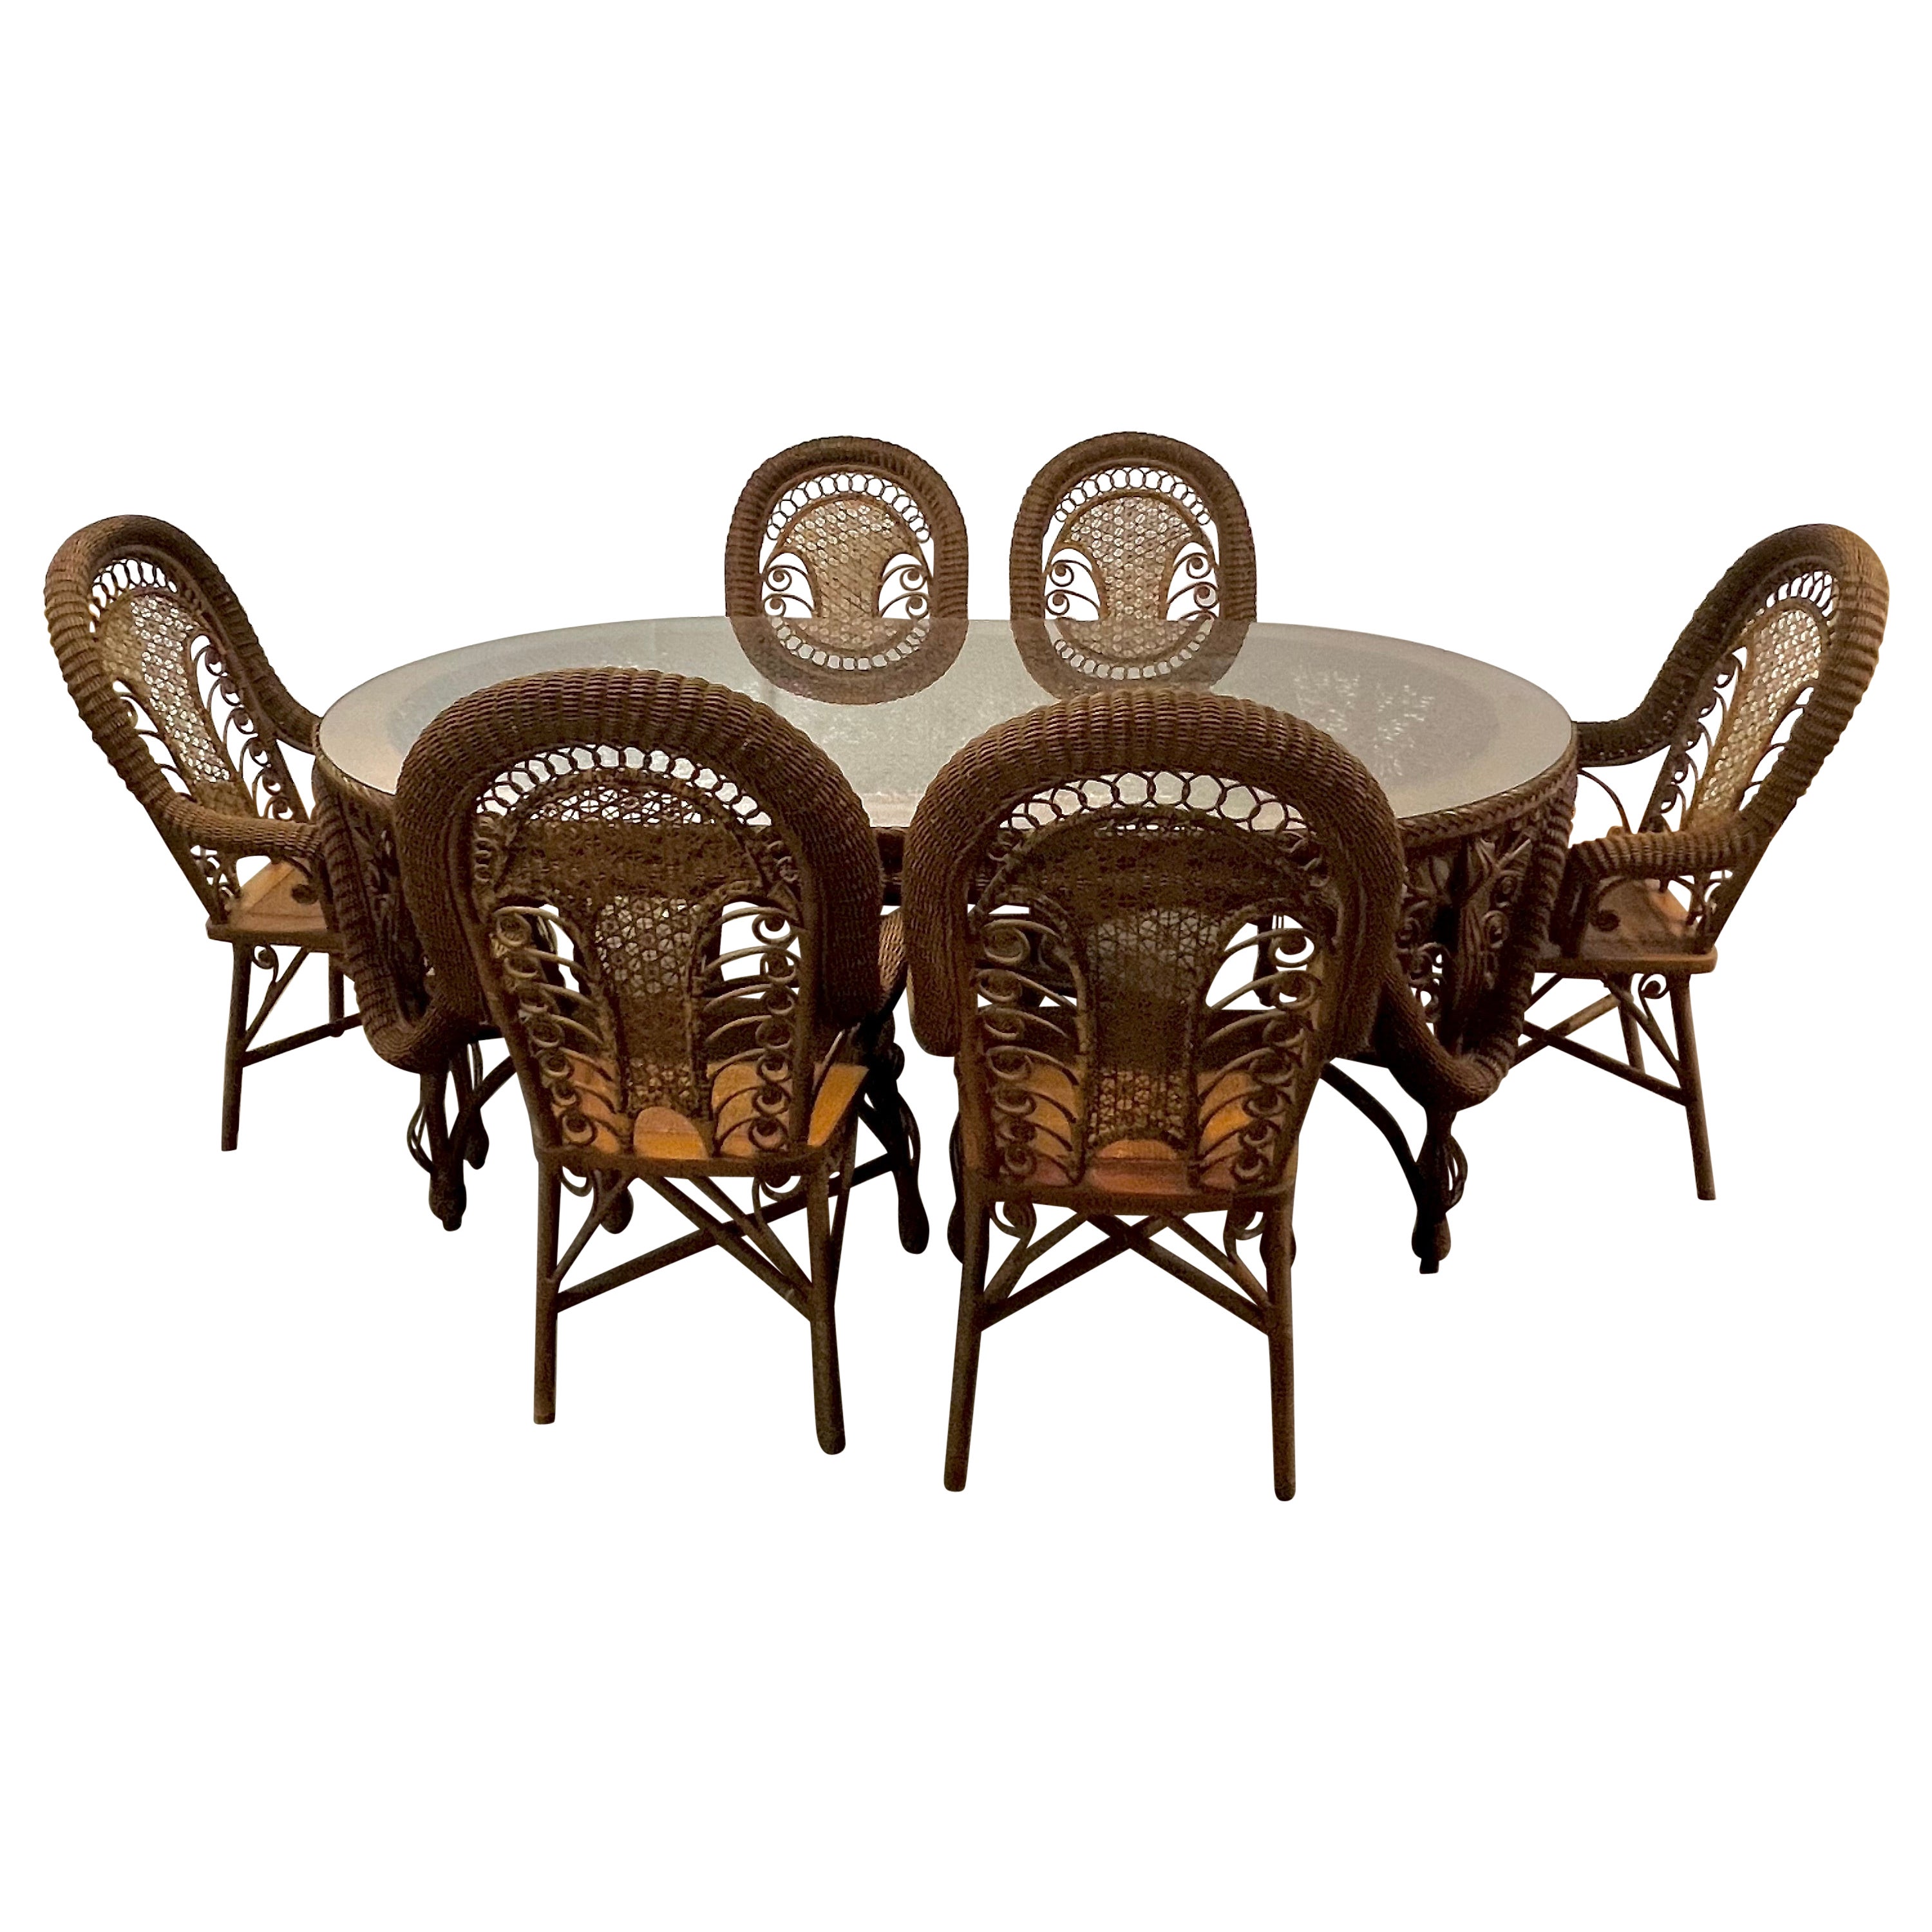 Wicker Dining Room Table with 6 Wicker Chairs For Sale